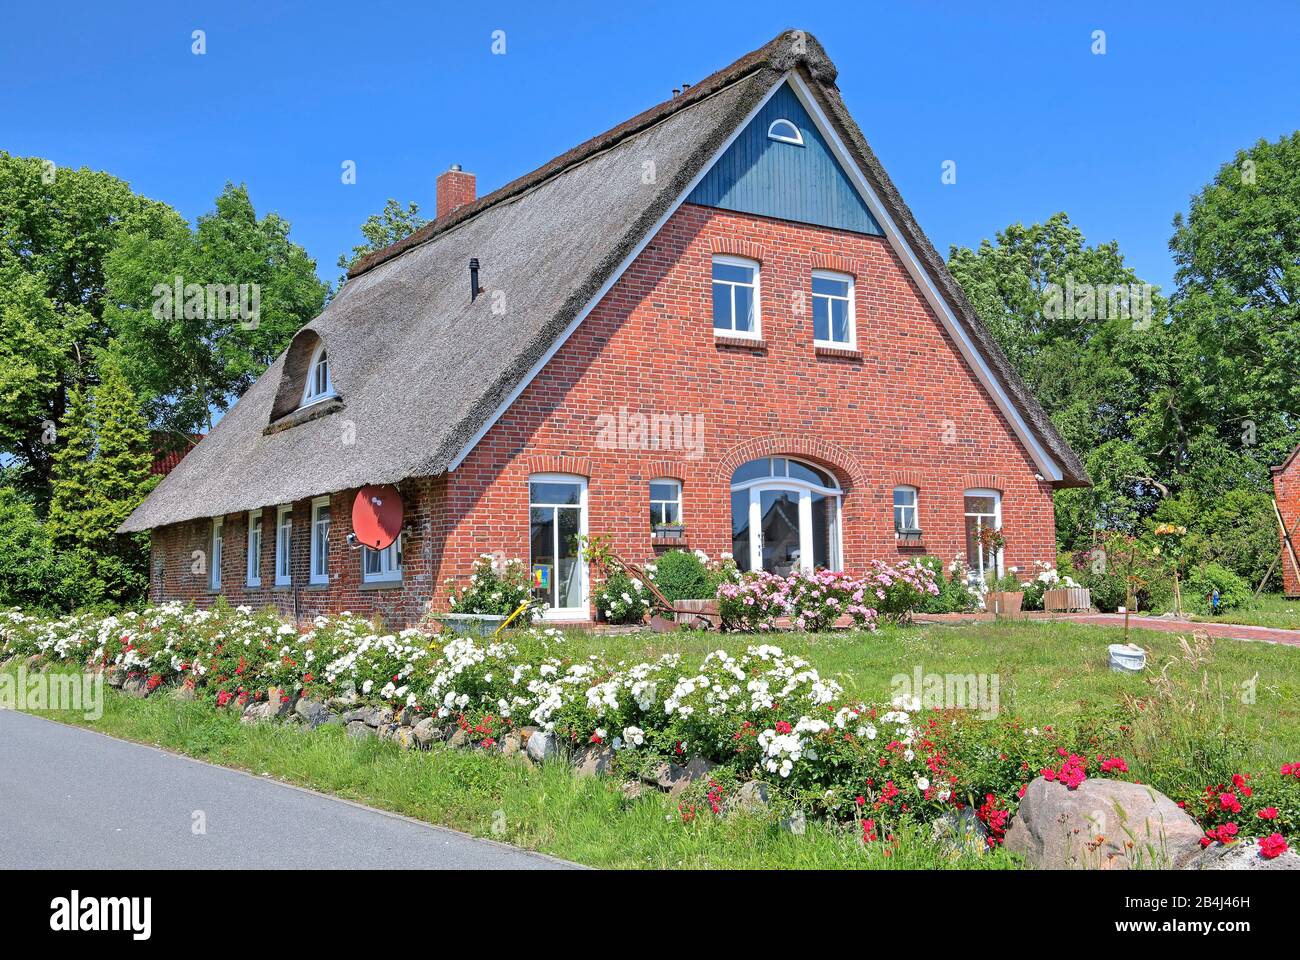 Typical country house with thatched roof, North Sea resort Wremen, Land Wursten, North Sea, North Sea Coast, Lower Saxony, Germany Stock Photo